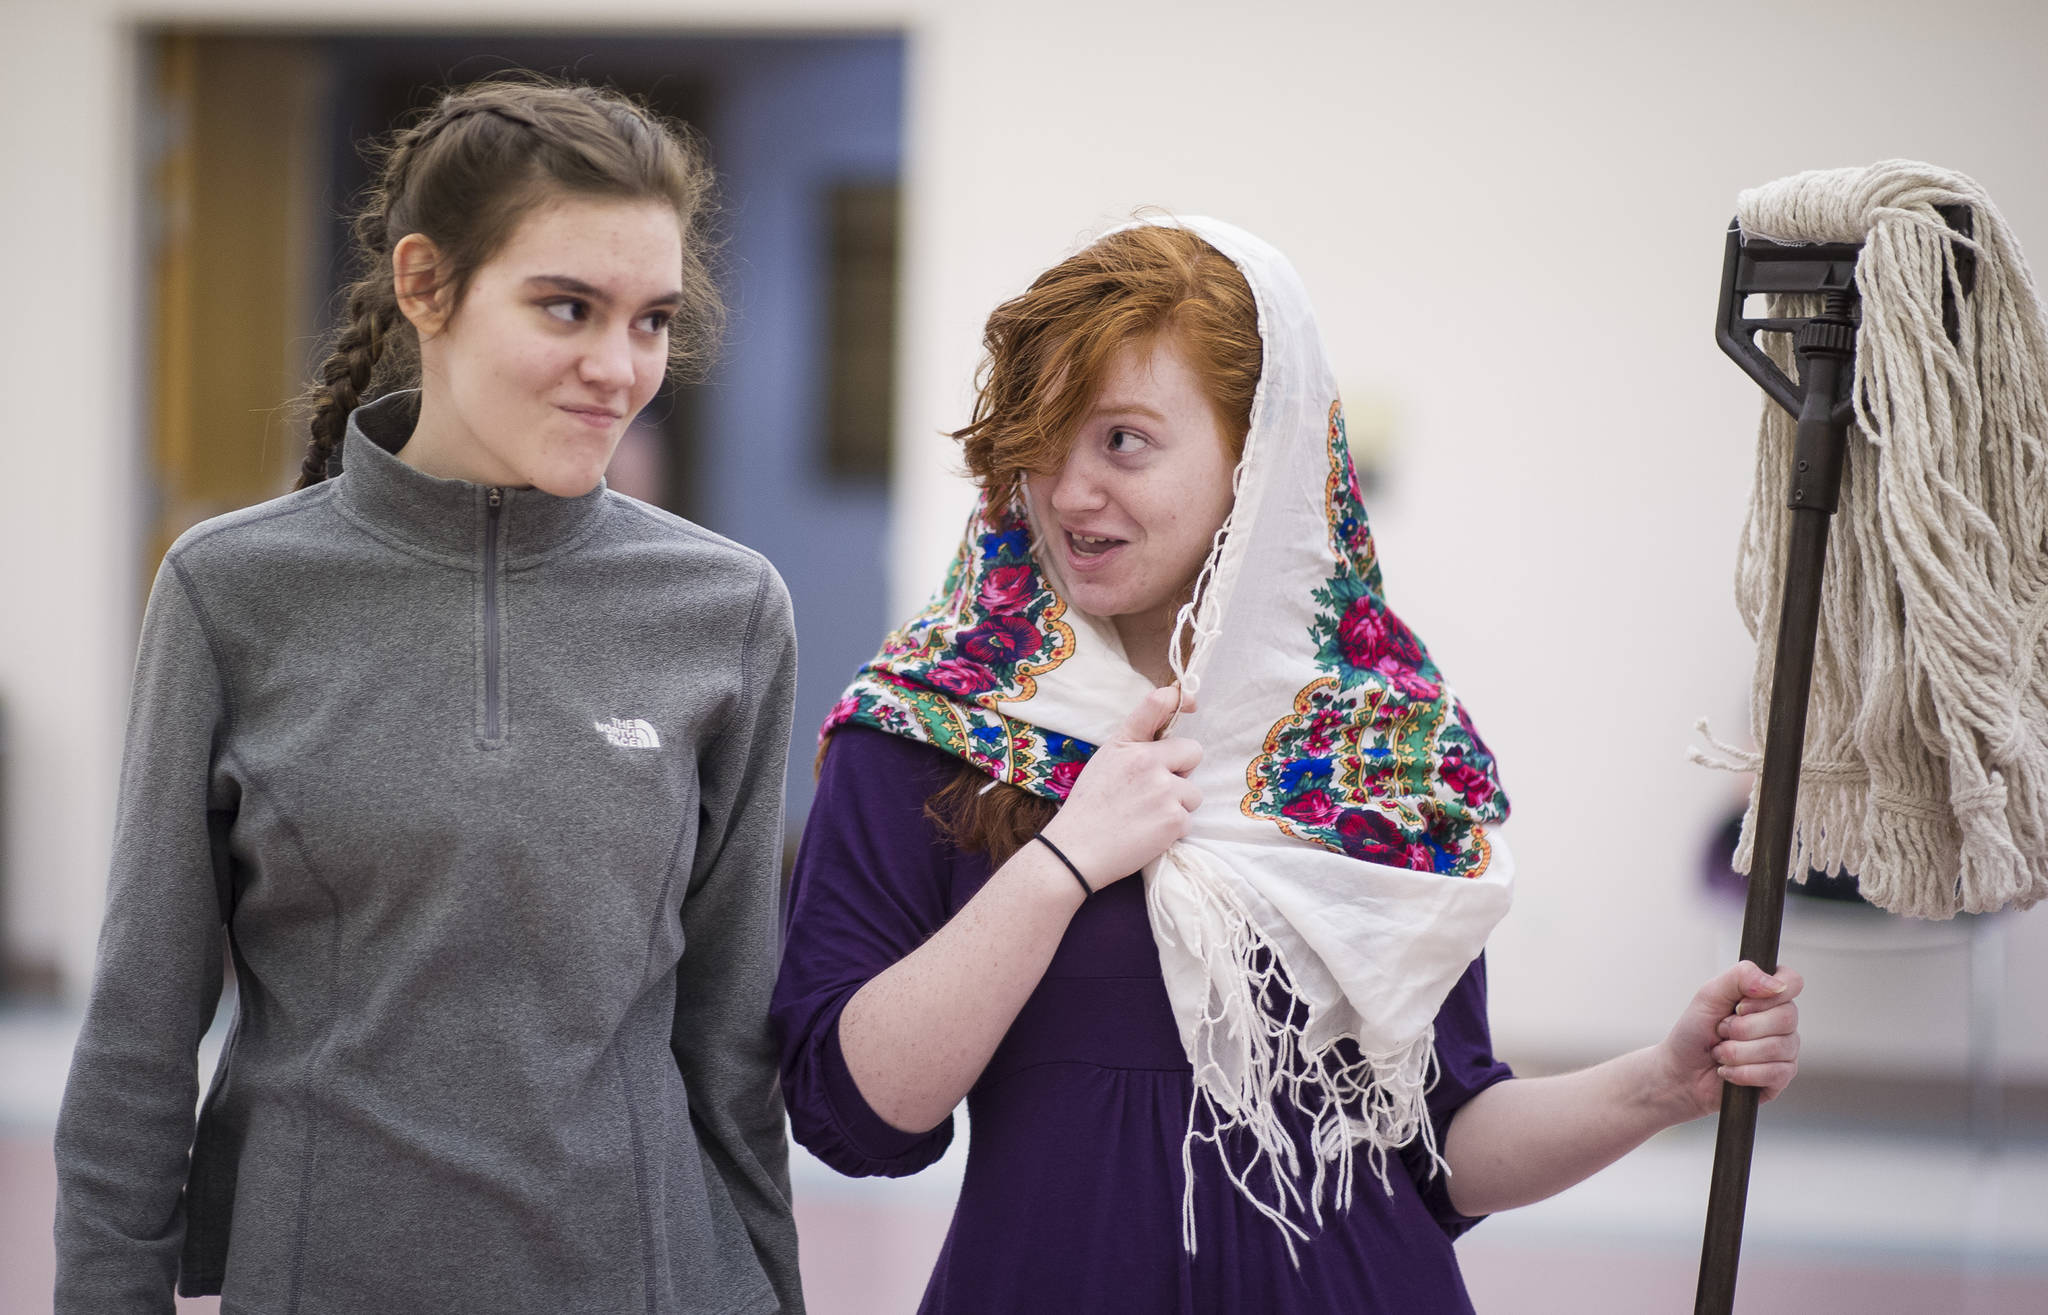 Ava Meade and Ashleigh Watt at the rehearsal of Latitude 58’s production of “Fiddler on the Roof” at St. Ann’s Hall on Thursday, Nov. 9, 2017. (Michael Penn | Capital City Weekly)